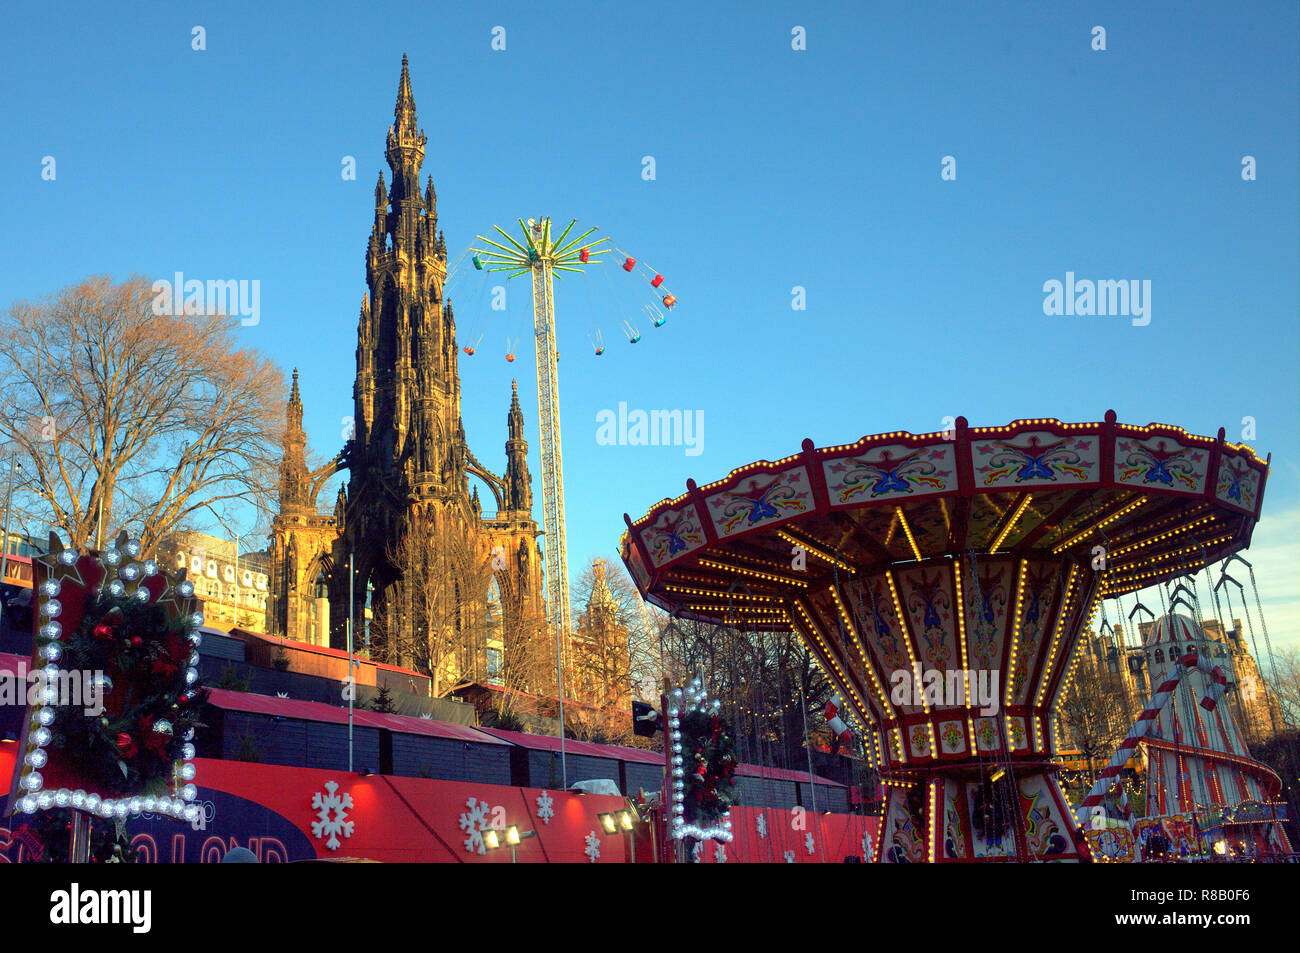 Edinburgh, Scotland, UK, 14th December. Edinburgh’s Christmas 2018 starts to really get under way with large crowds of locals and tourists braving the cold weather to fill the streets and enjoy the attractions under the festive lighting as the capital prepares for it’s world famous New  Year. Credit Gerard Ferry/Alamy Live News Stock Photo